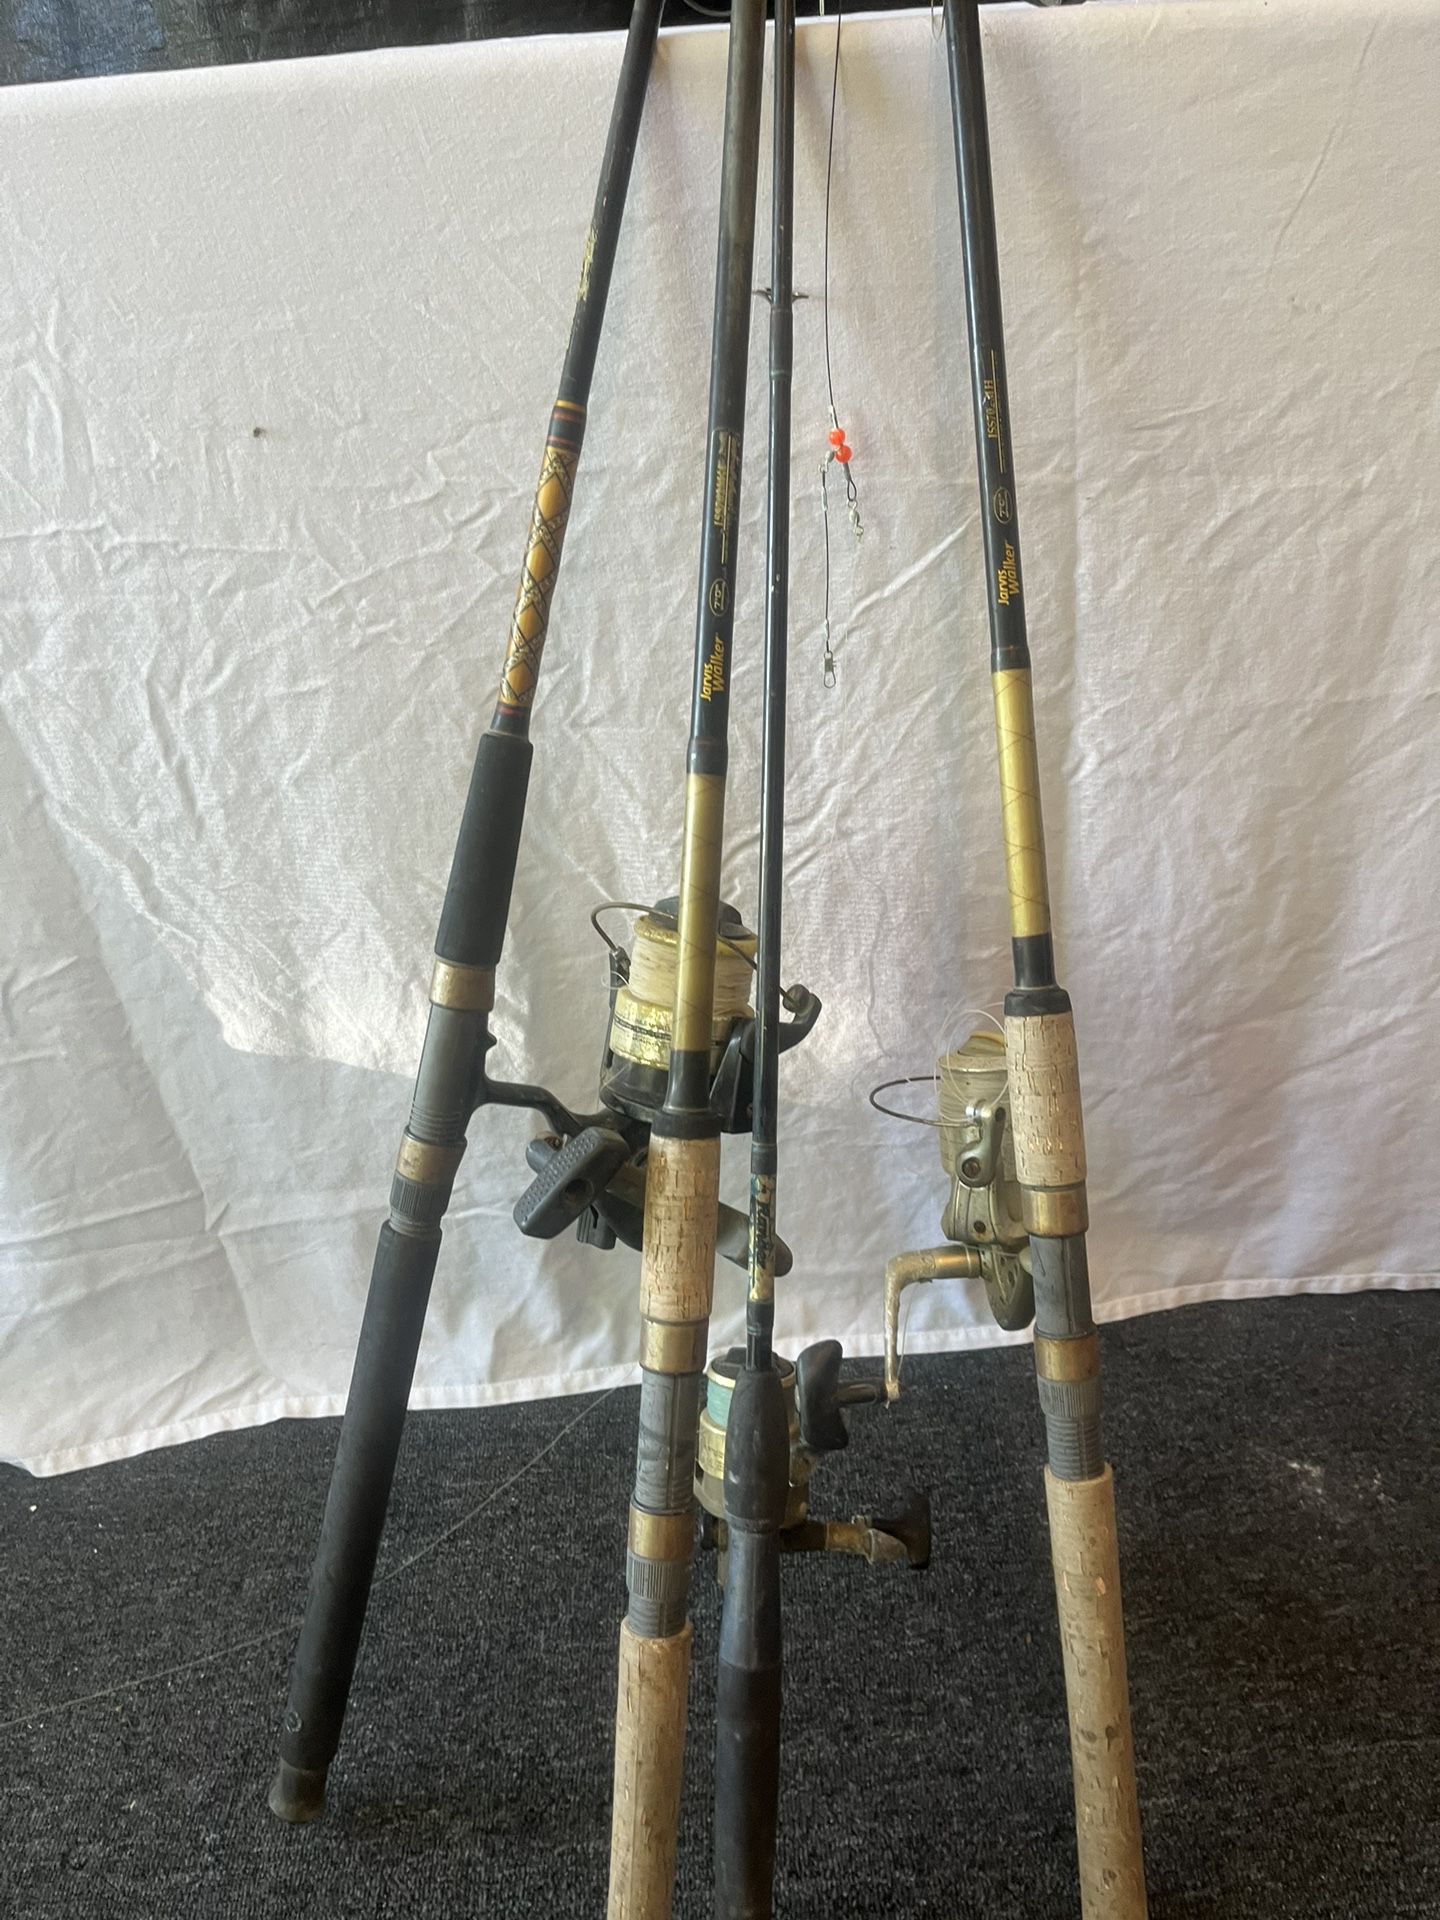 Old Fishing Poles And Reels